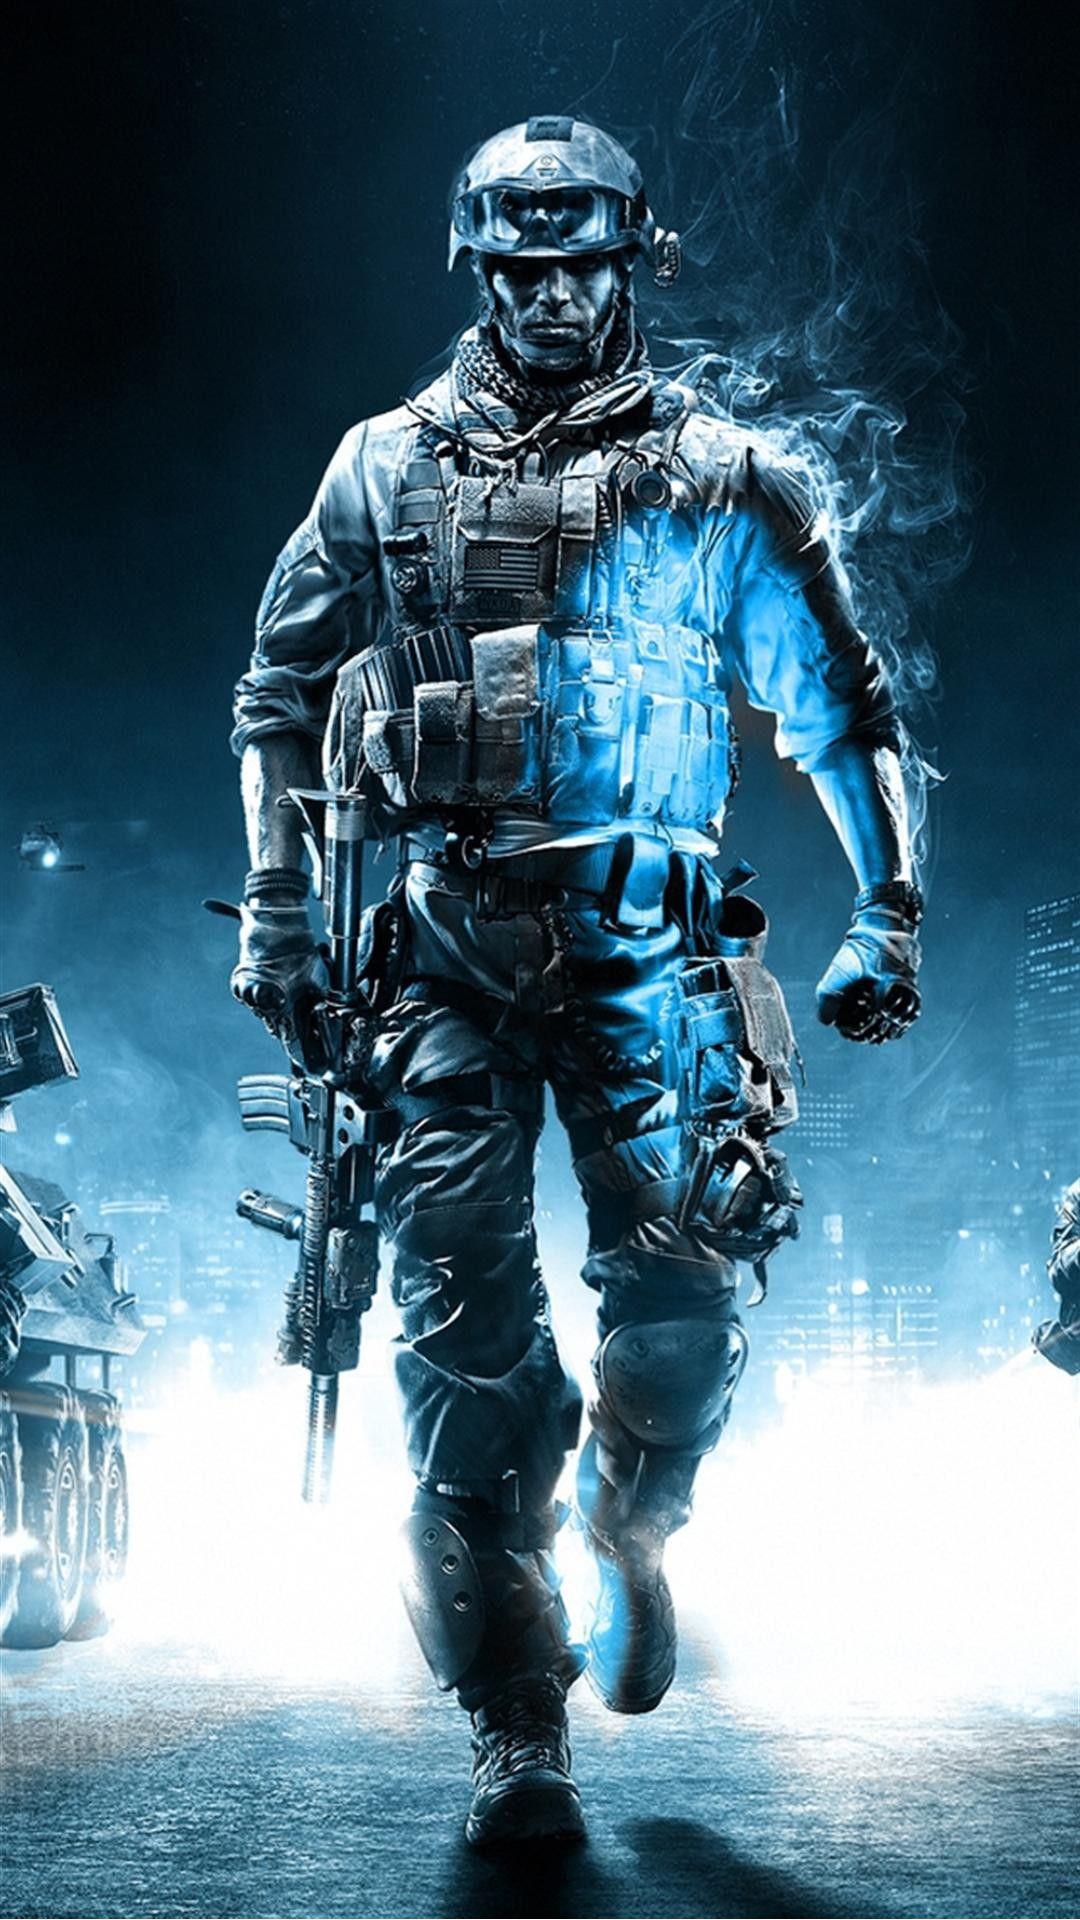 Call Of Duty Ghosts Free Download